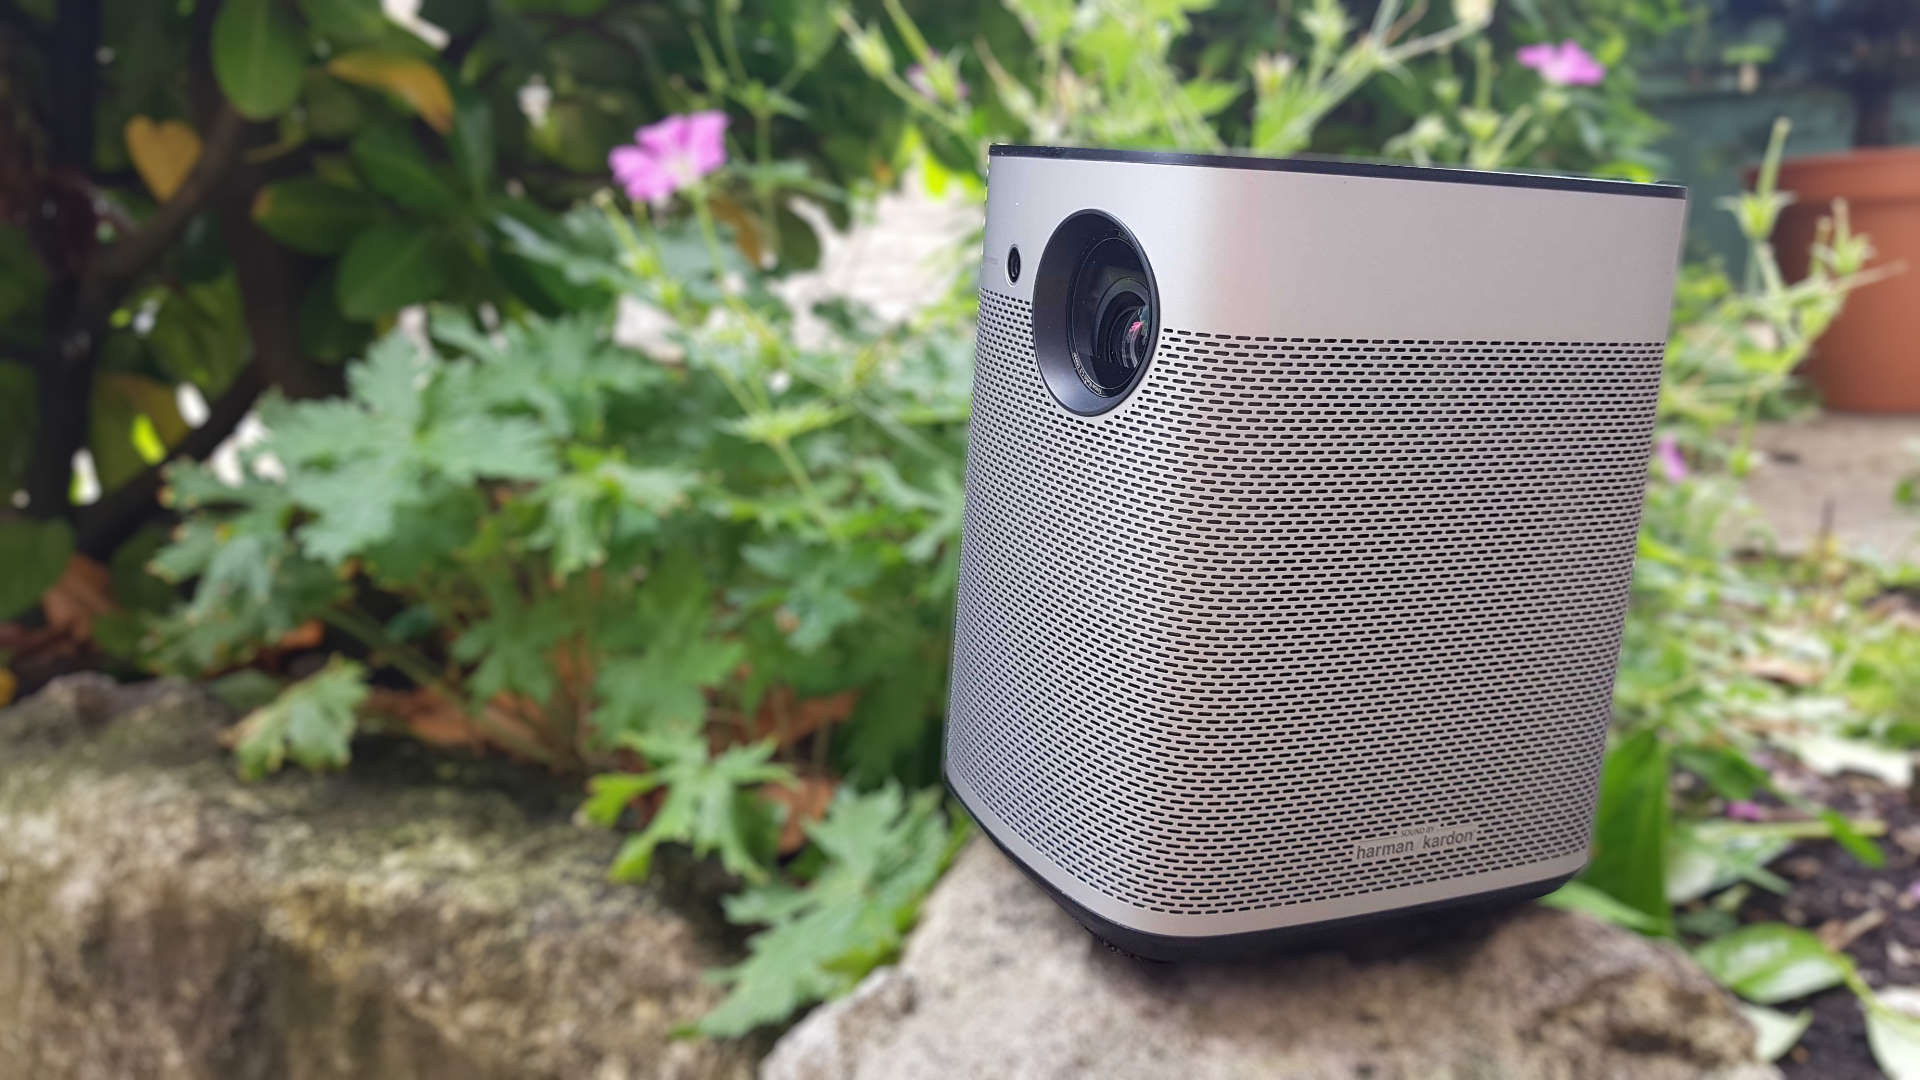 Xgimi Halo Plus Review: Perfectly Portable Smart TV Projector